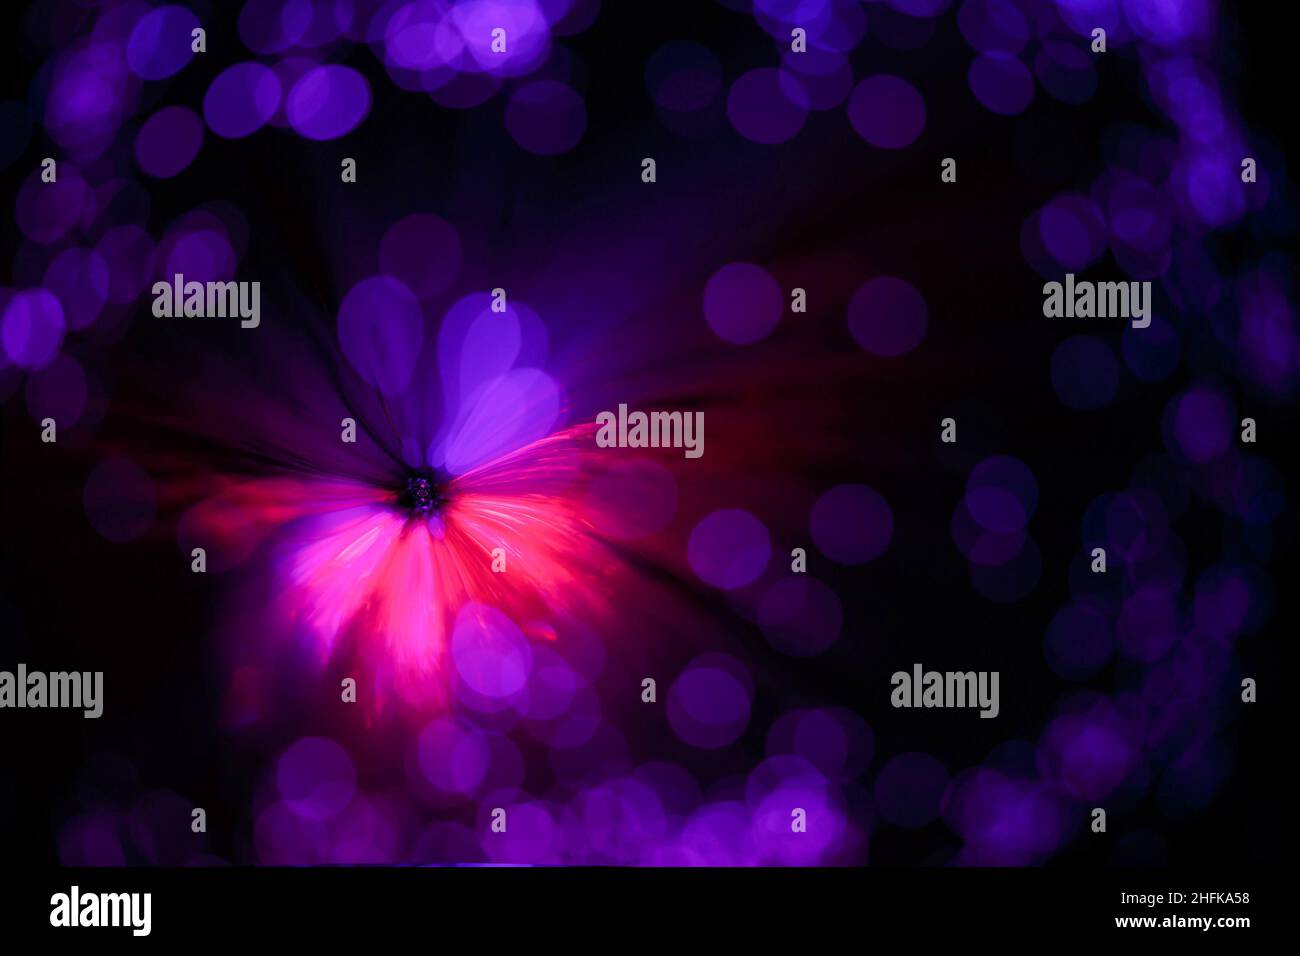 Abstract purple background in the form of a flower and blurred spots. Stock Photo